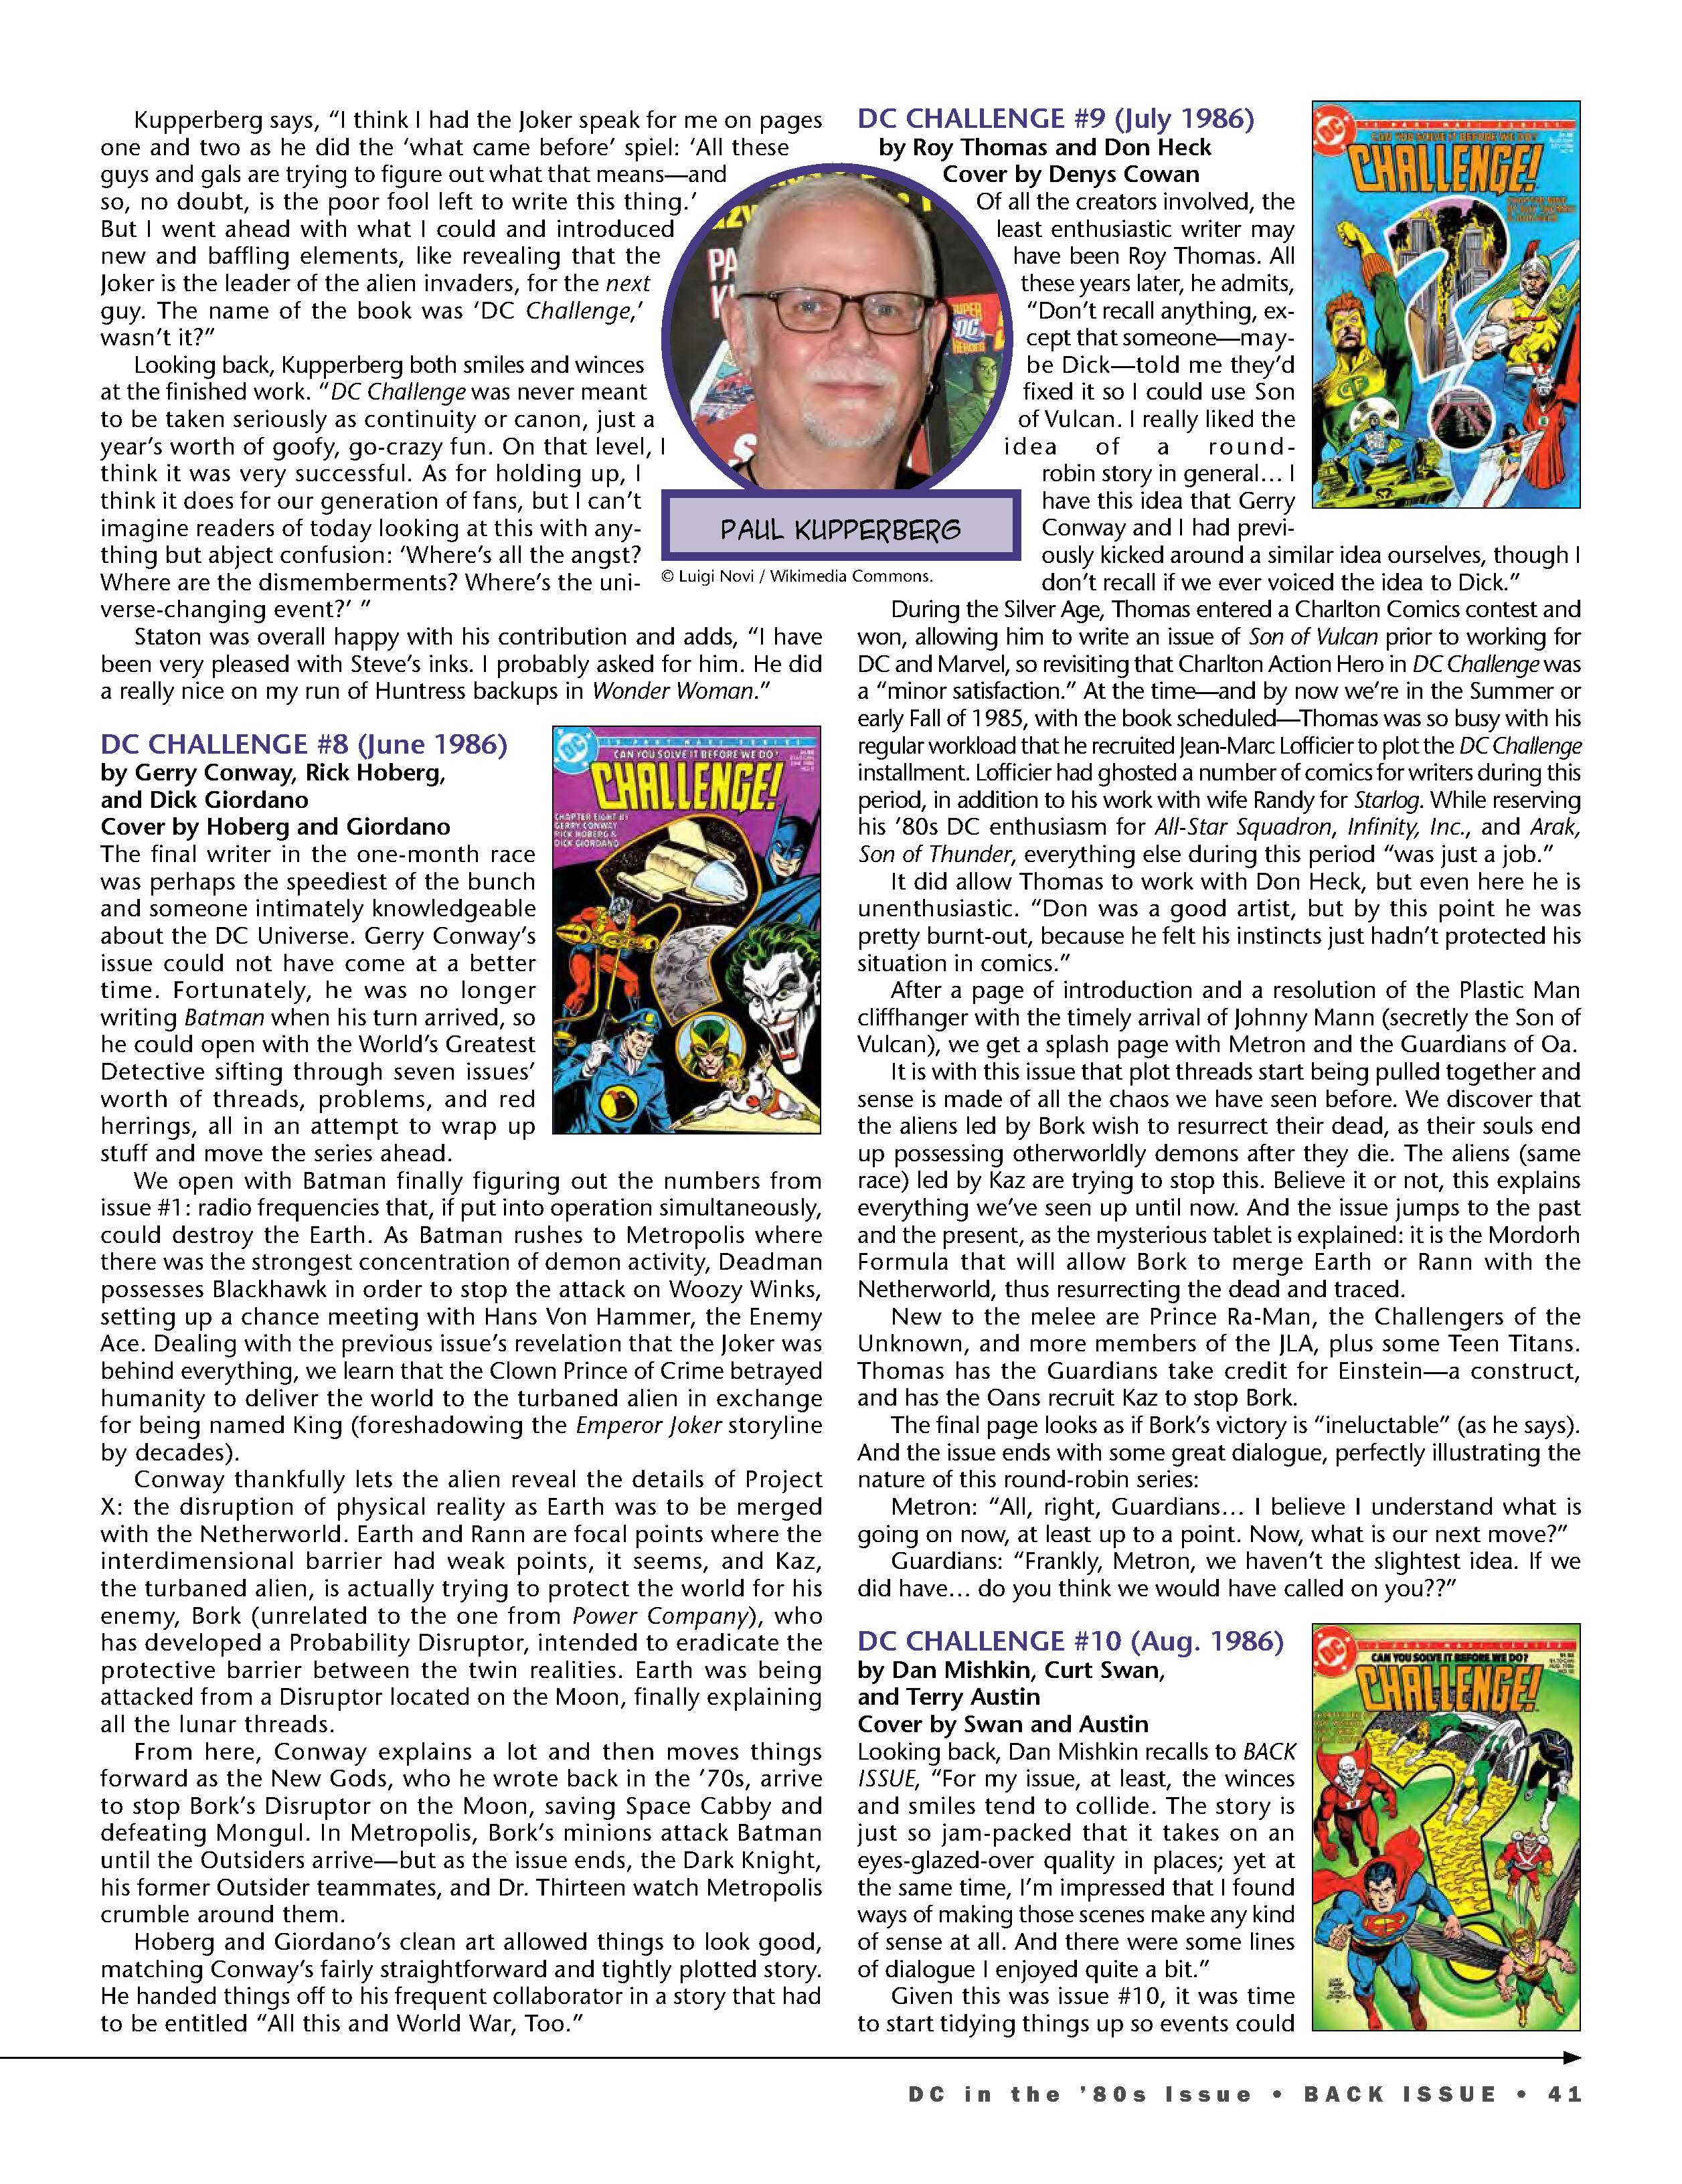 Read online Back Issue comic -  Issue #98 - 43